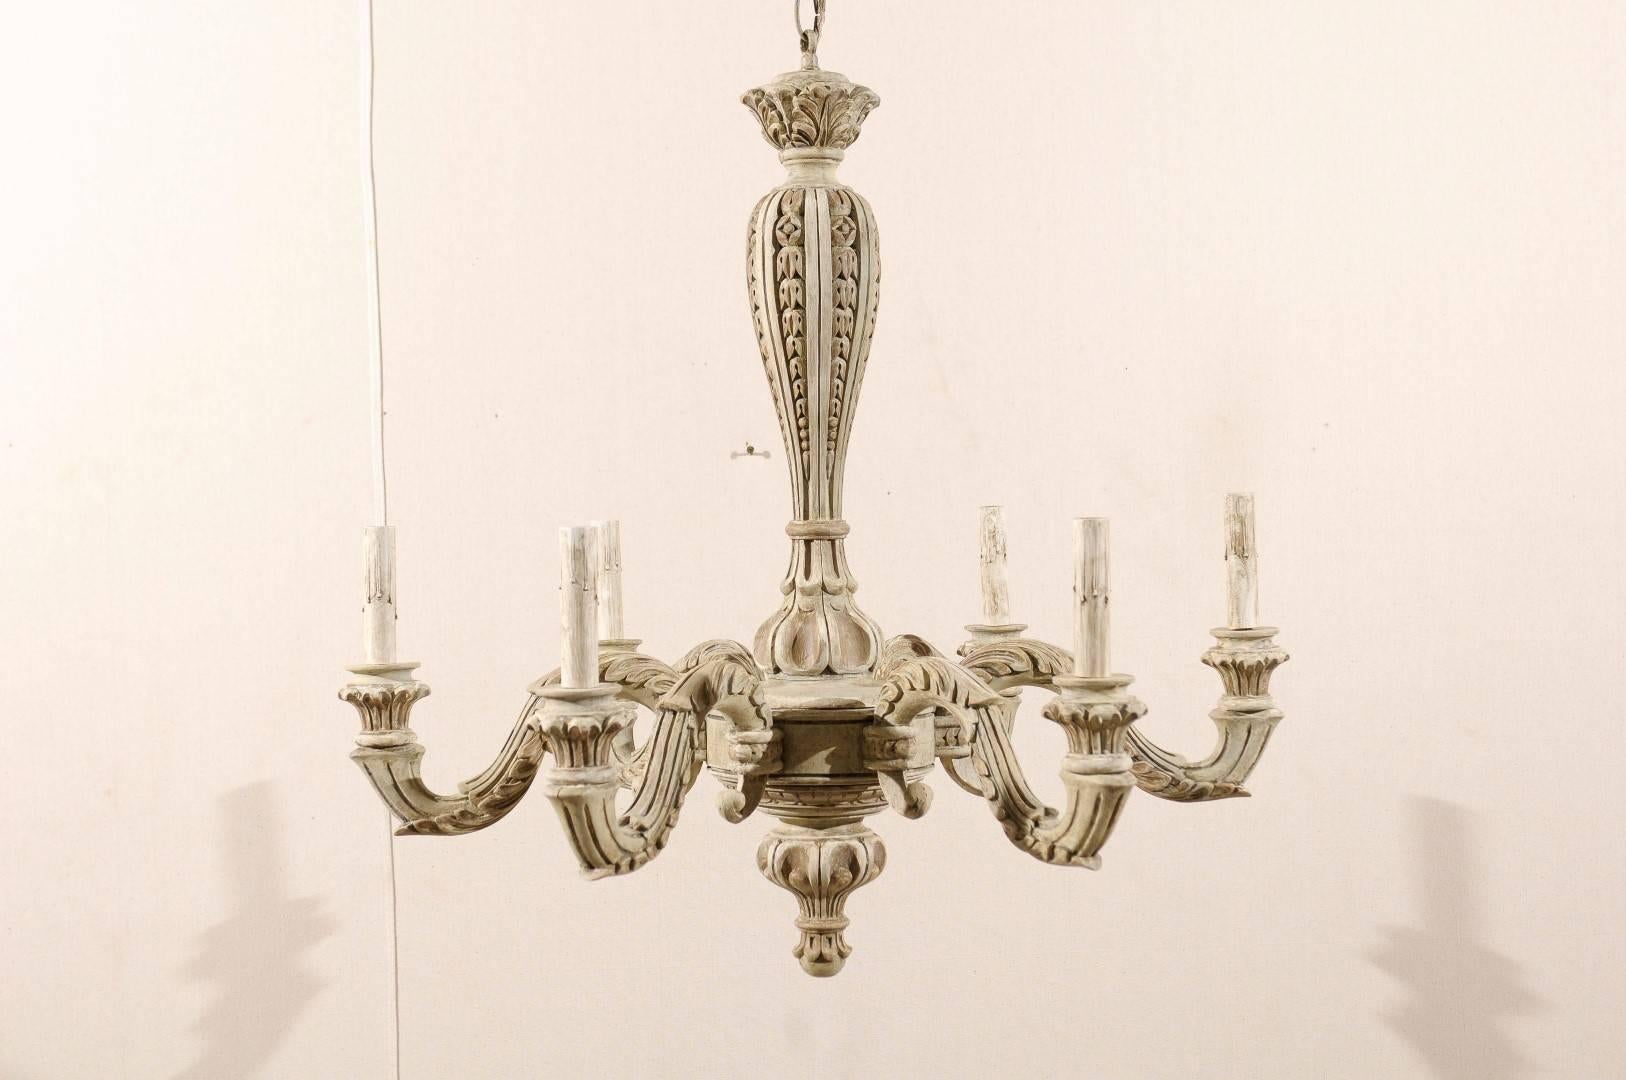 A French six-light painted and carved wood chandelier with scroll arms and wood bobèches. This French mid-20th century chandelier features a central carved column. The S-scroll arms are supporting wooden bobèches and painted candle sleeves. The